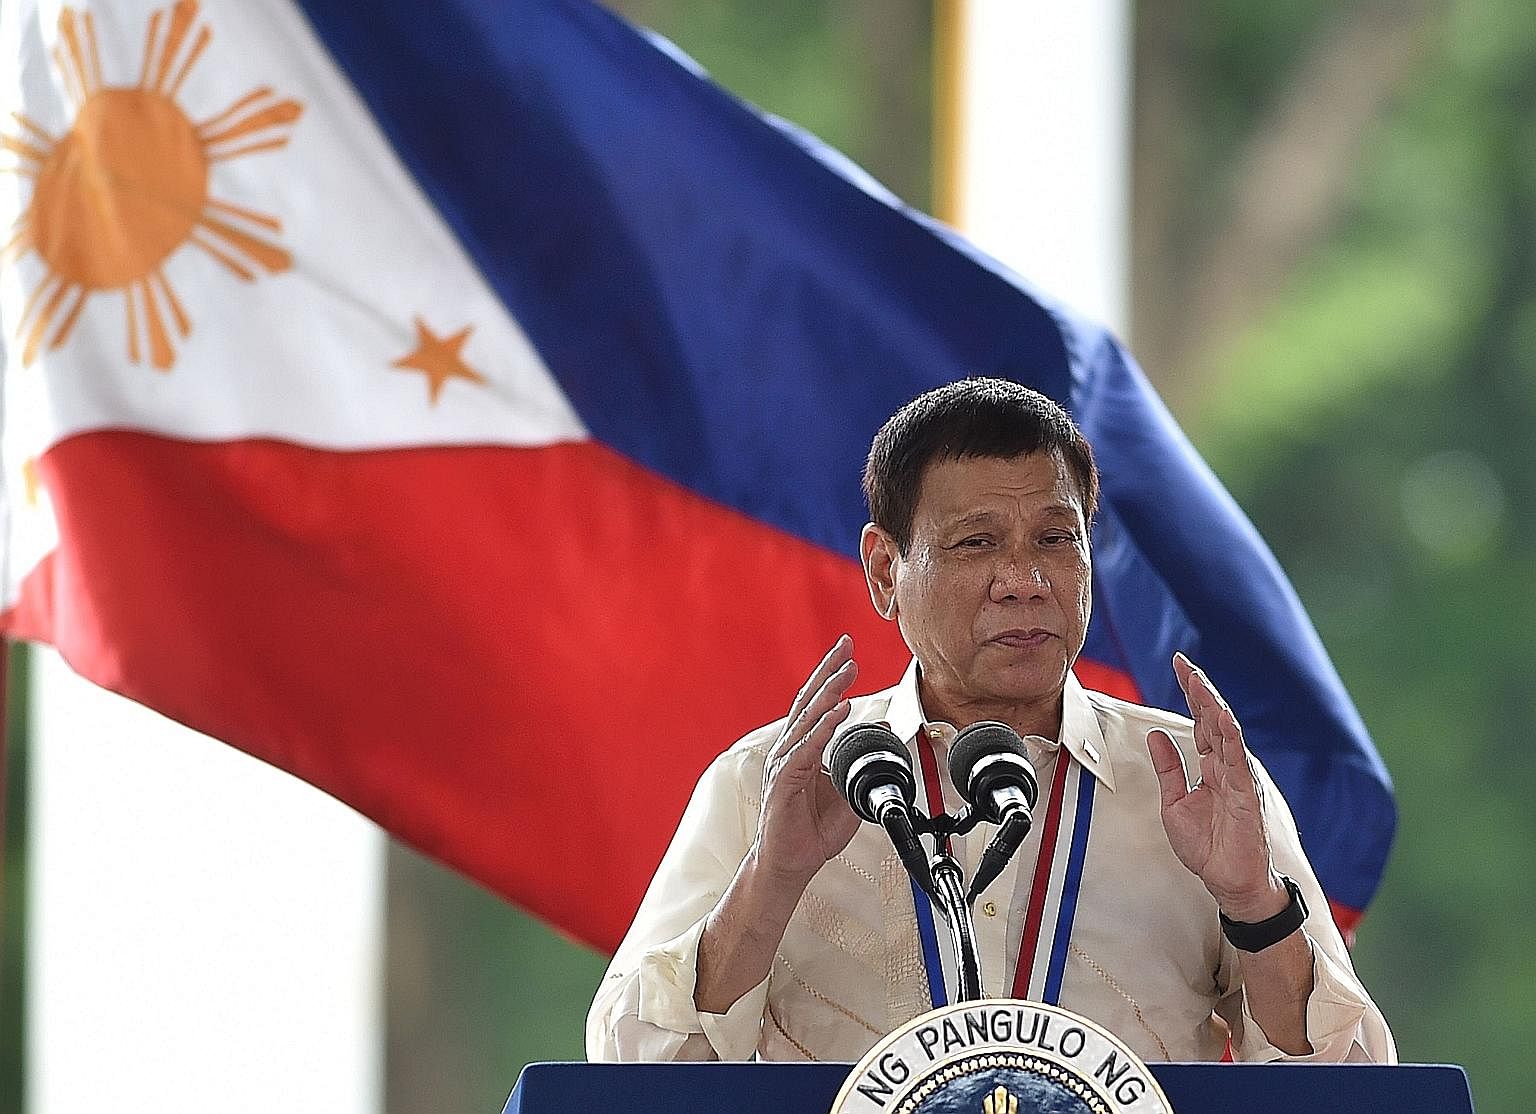 President Duterte's administration is not only interested in rebuilding frayed ties with China, which has dangled large-scale infrastructure investments among other incentives, but is also calling for a more independent Philippine foreign policy whic